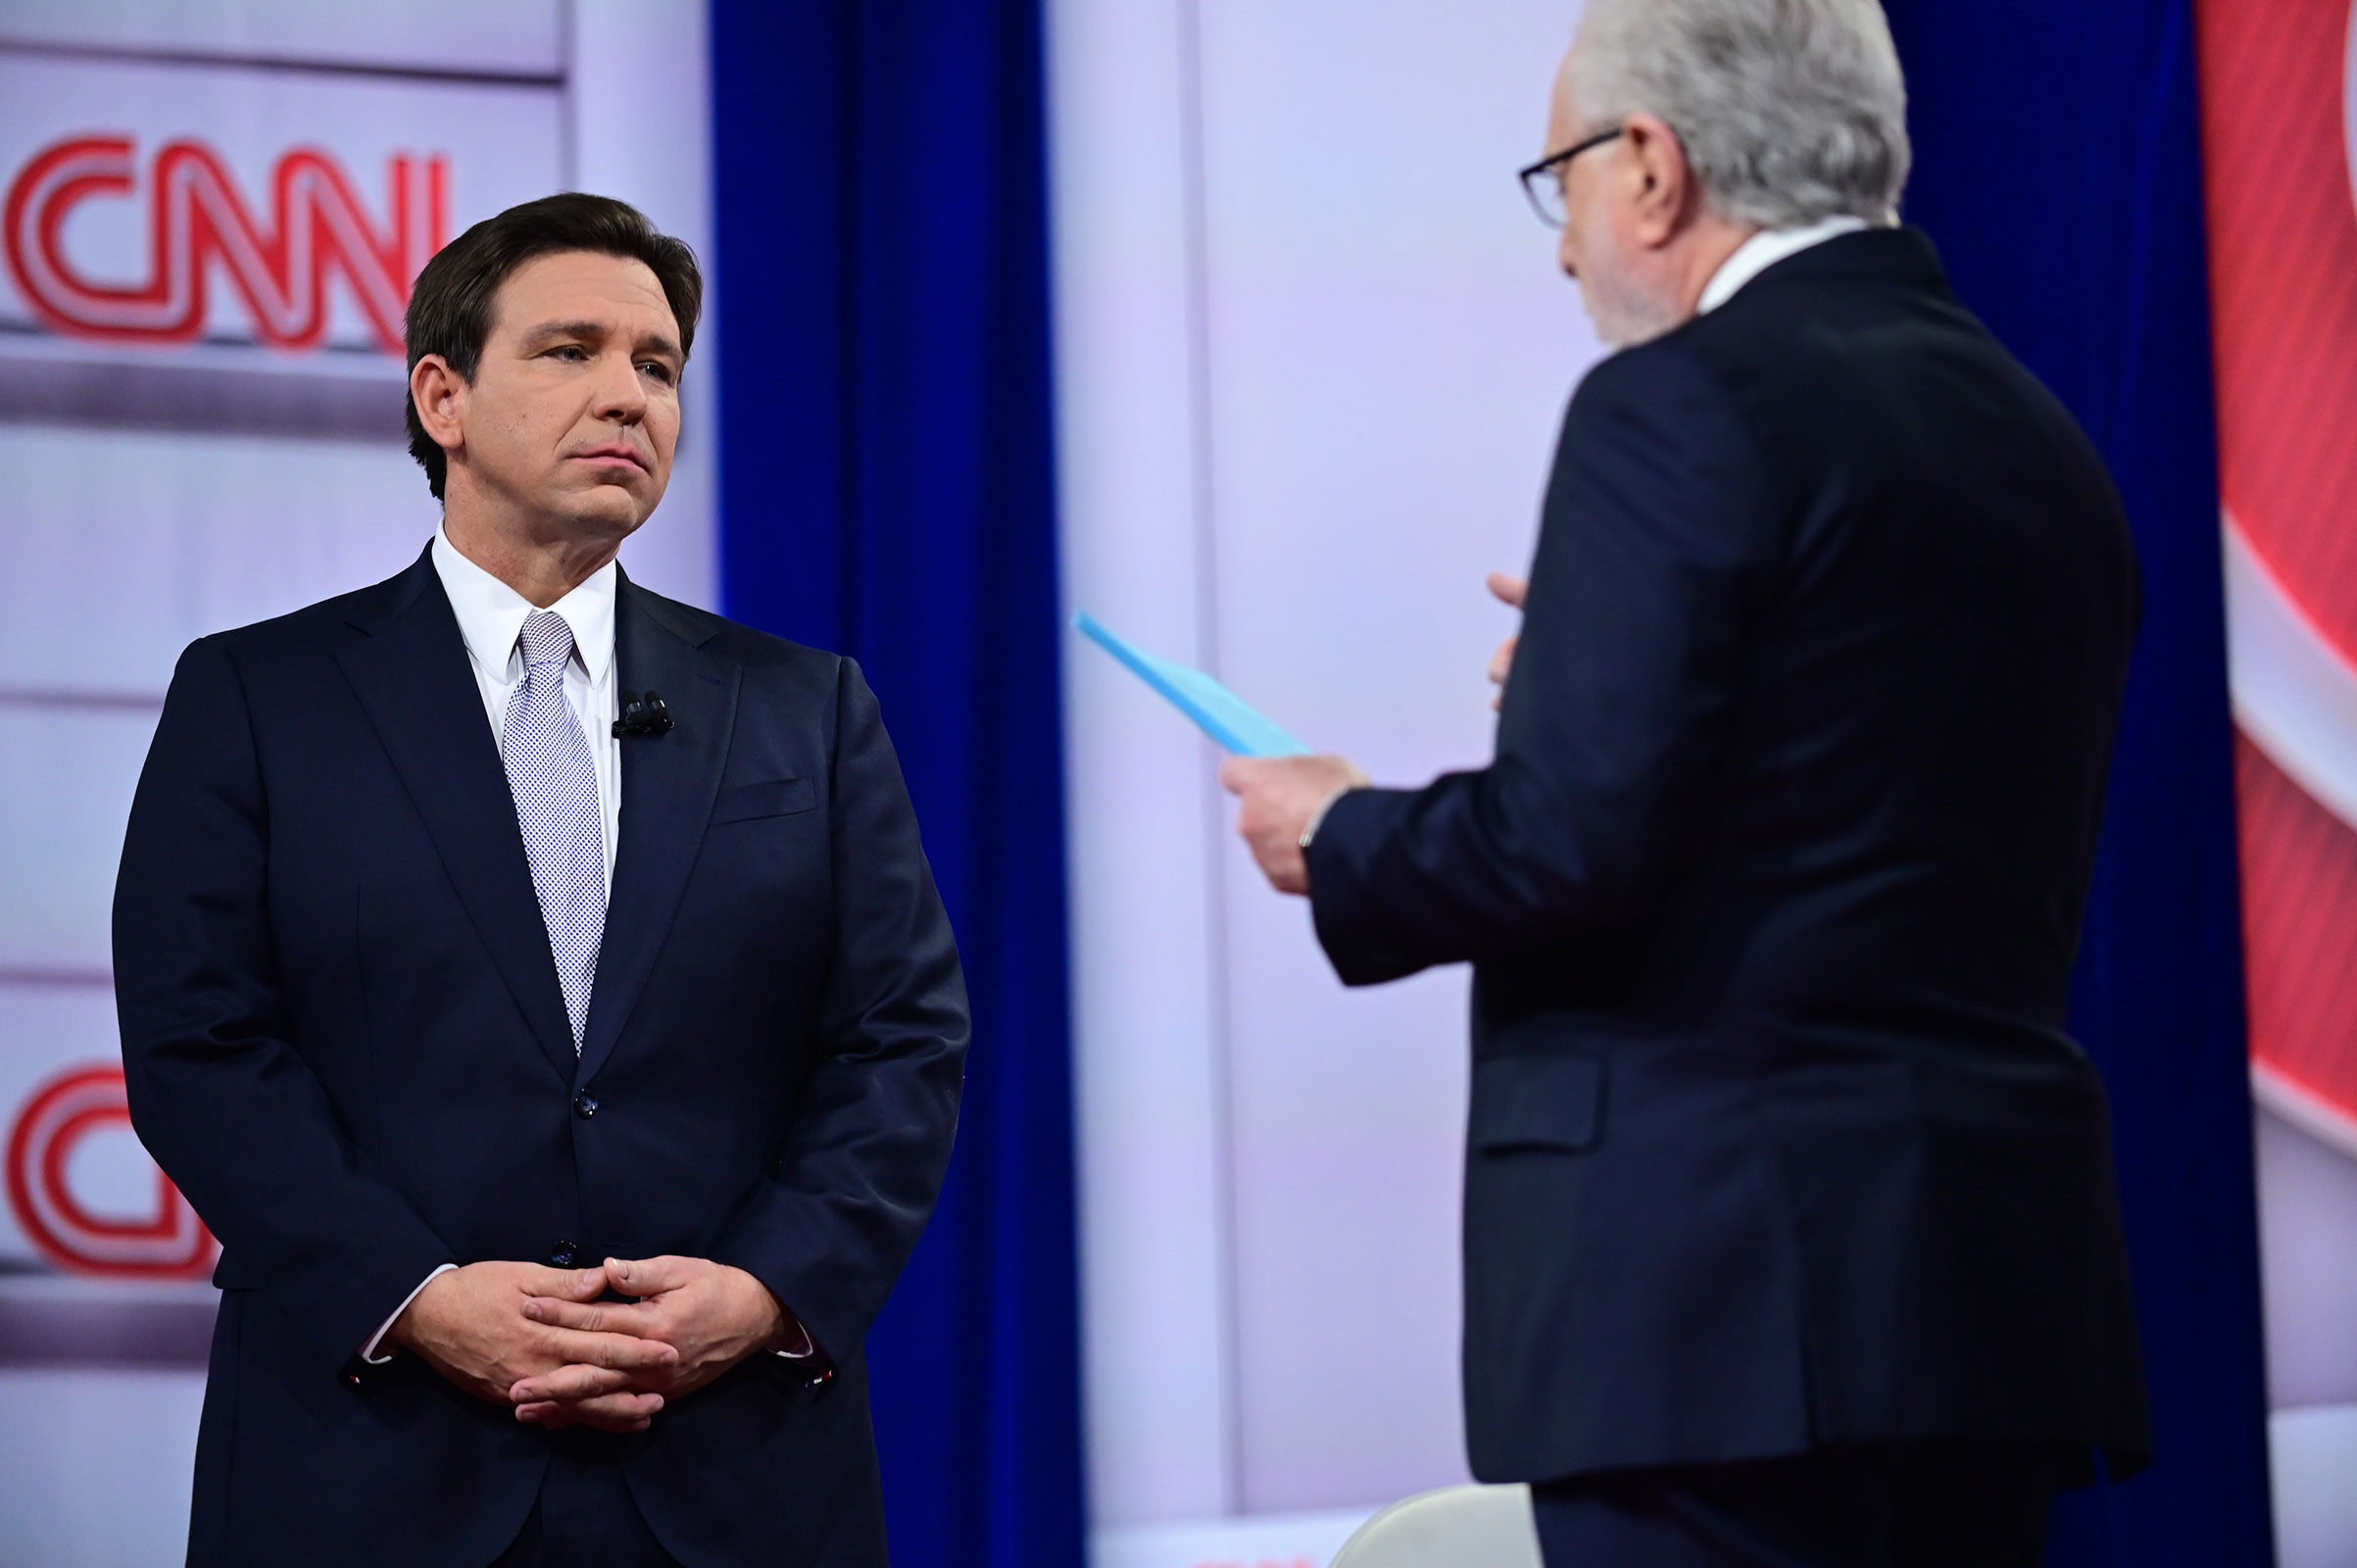 DeSantis participates in a CNN Republican Presidential Town Hall moderated by CNN’s Wolf Blitzer on Tuesday in New Hampshire.